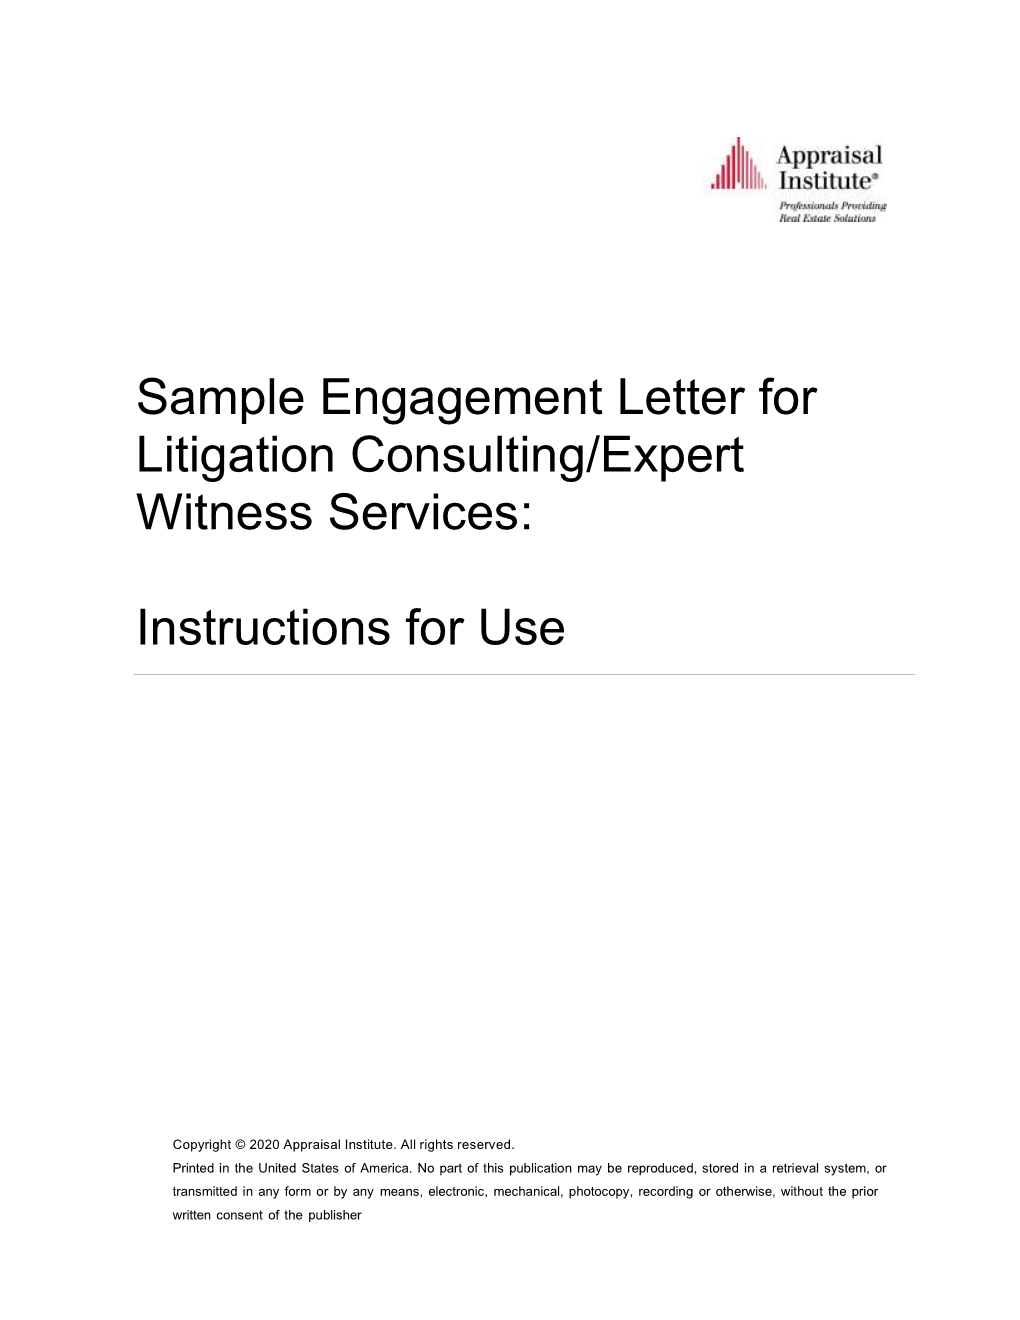 Sample Engagement Letter for Litigation Consulting/Expert Witness Services: Instructions for Use